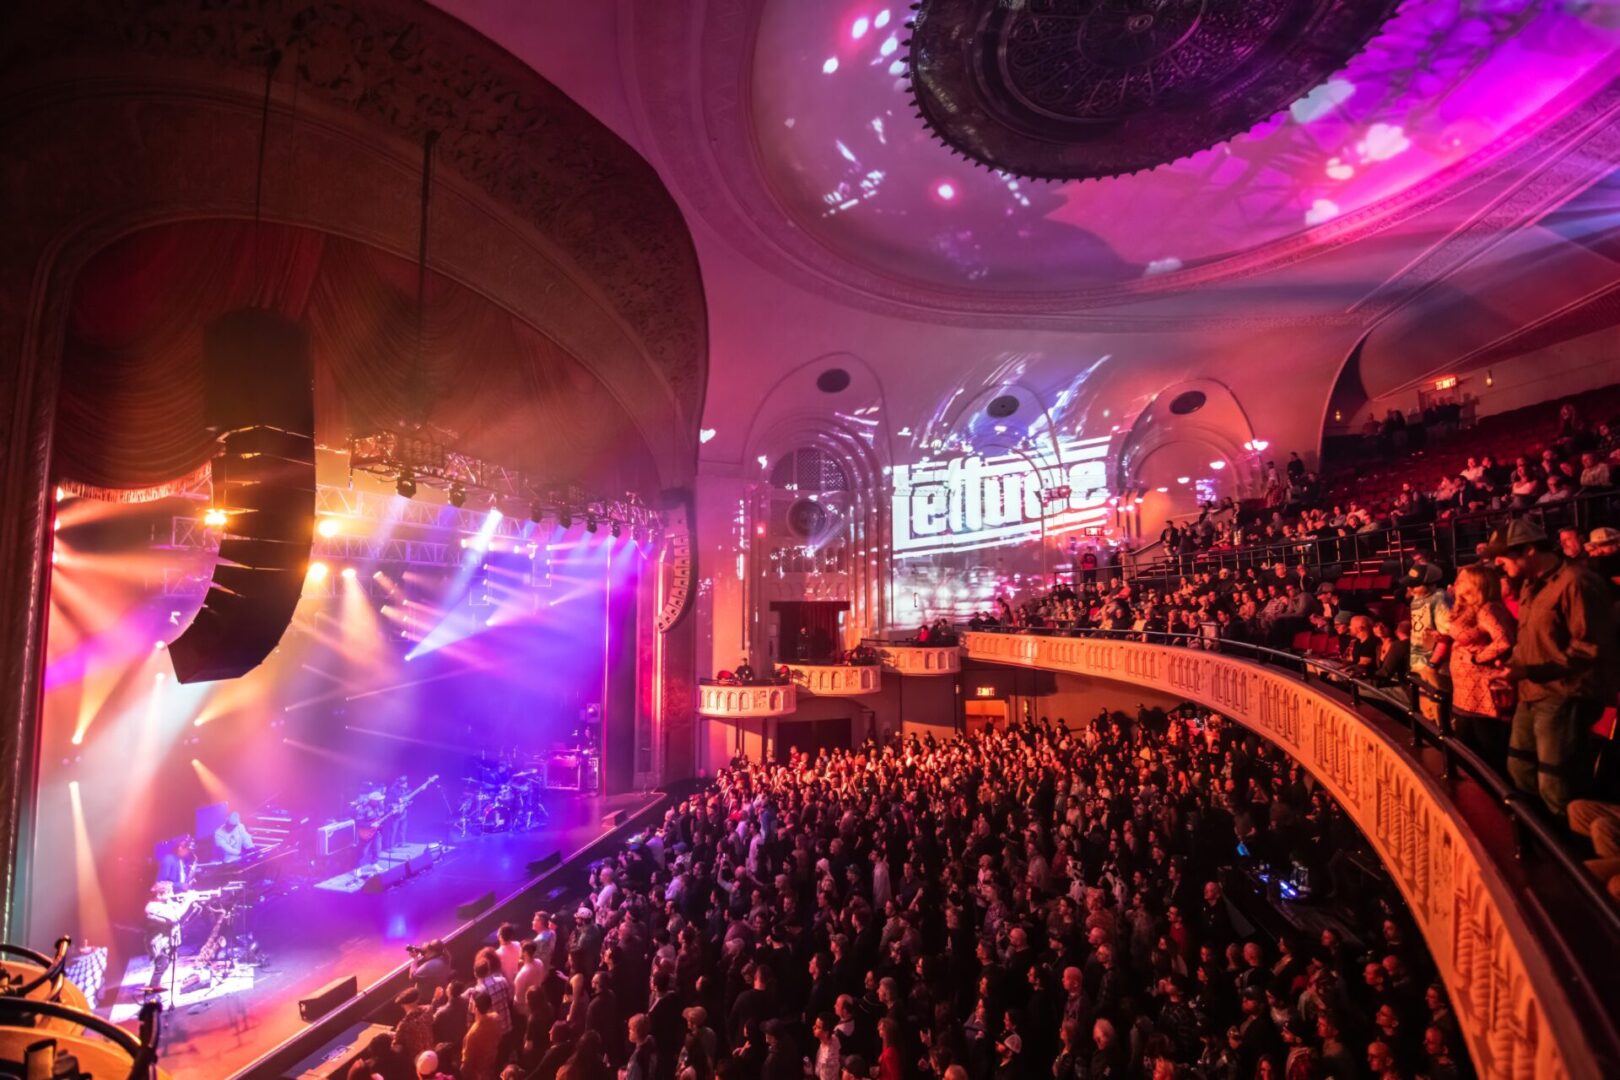 A large auditorium filled with people watching a concert.